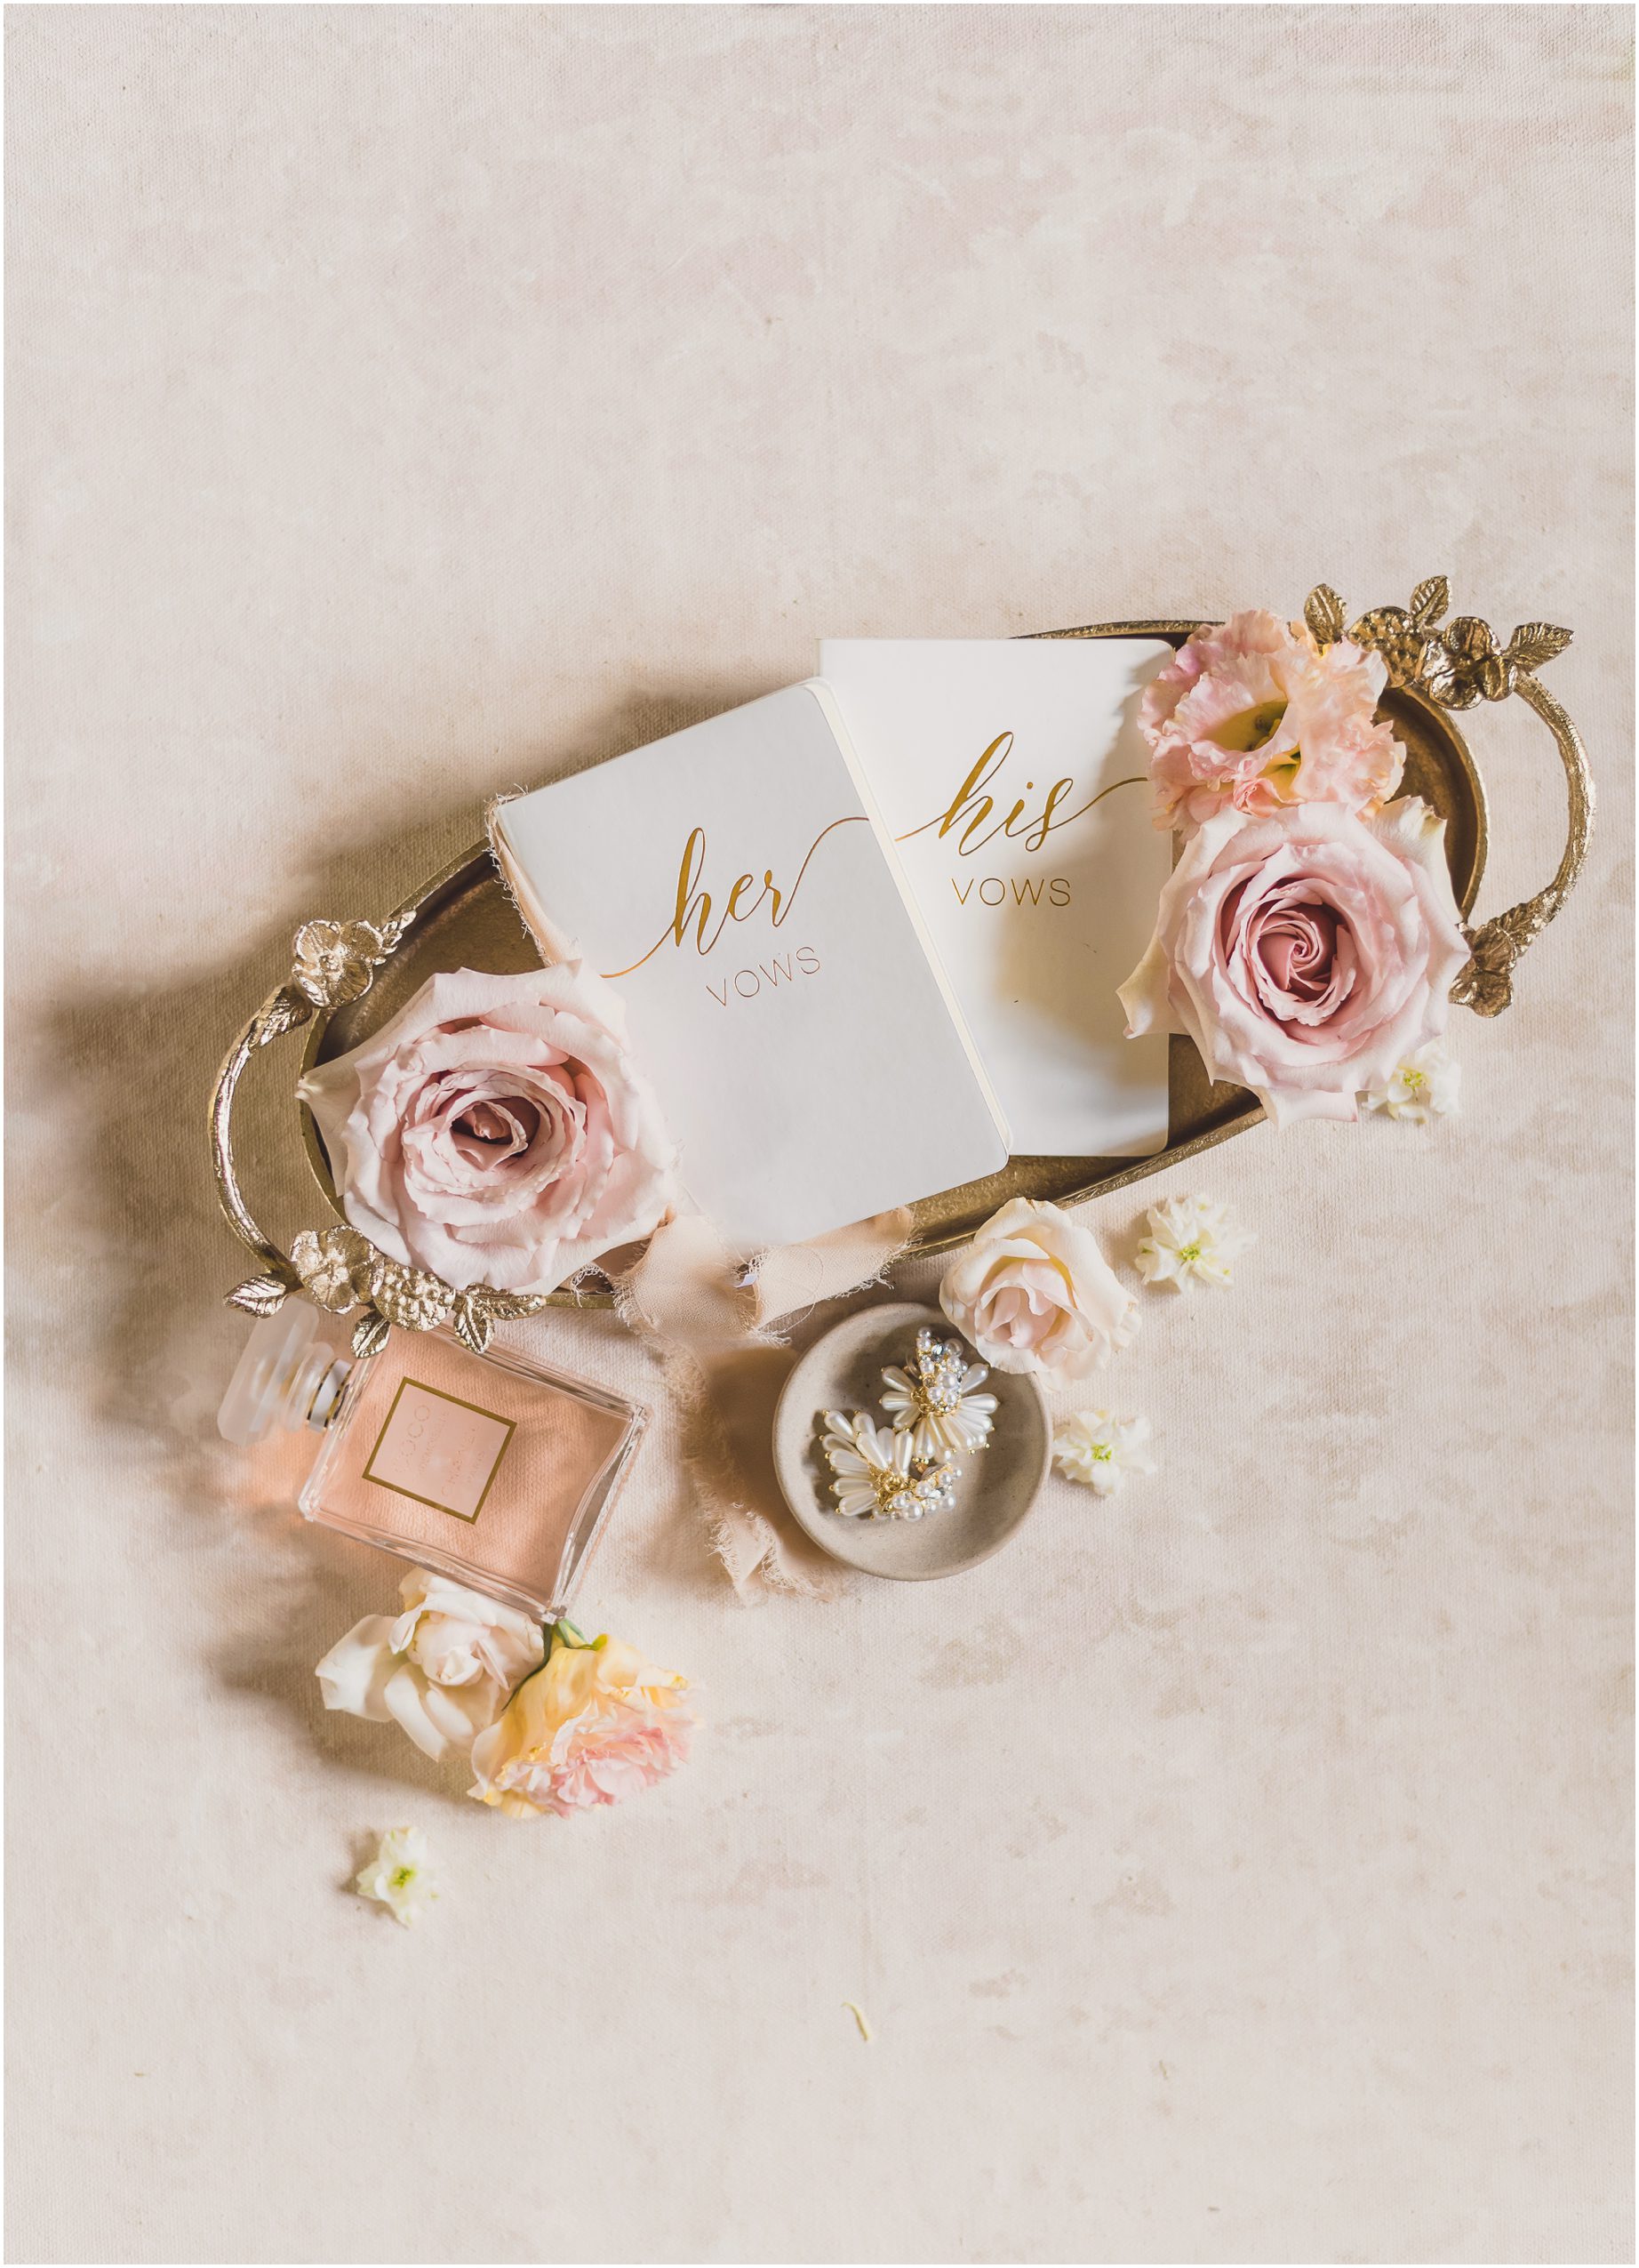 wedding details for a wedding in Southern California, featuring perfume, vow cards, pink flowers, white earrings, and a golden plate